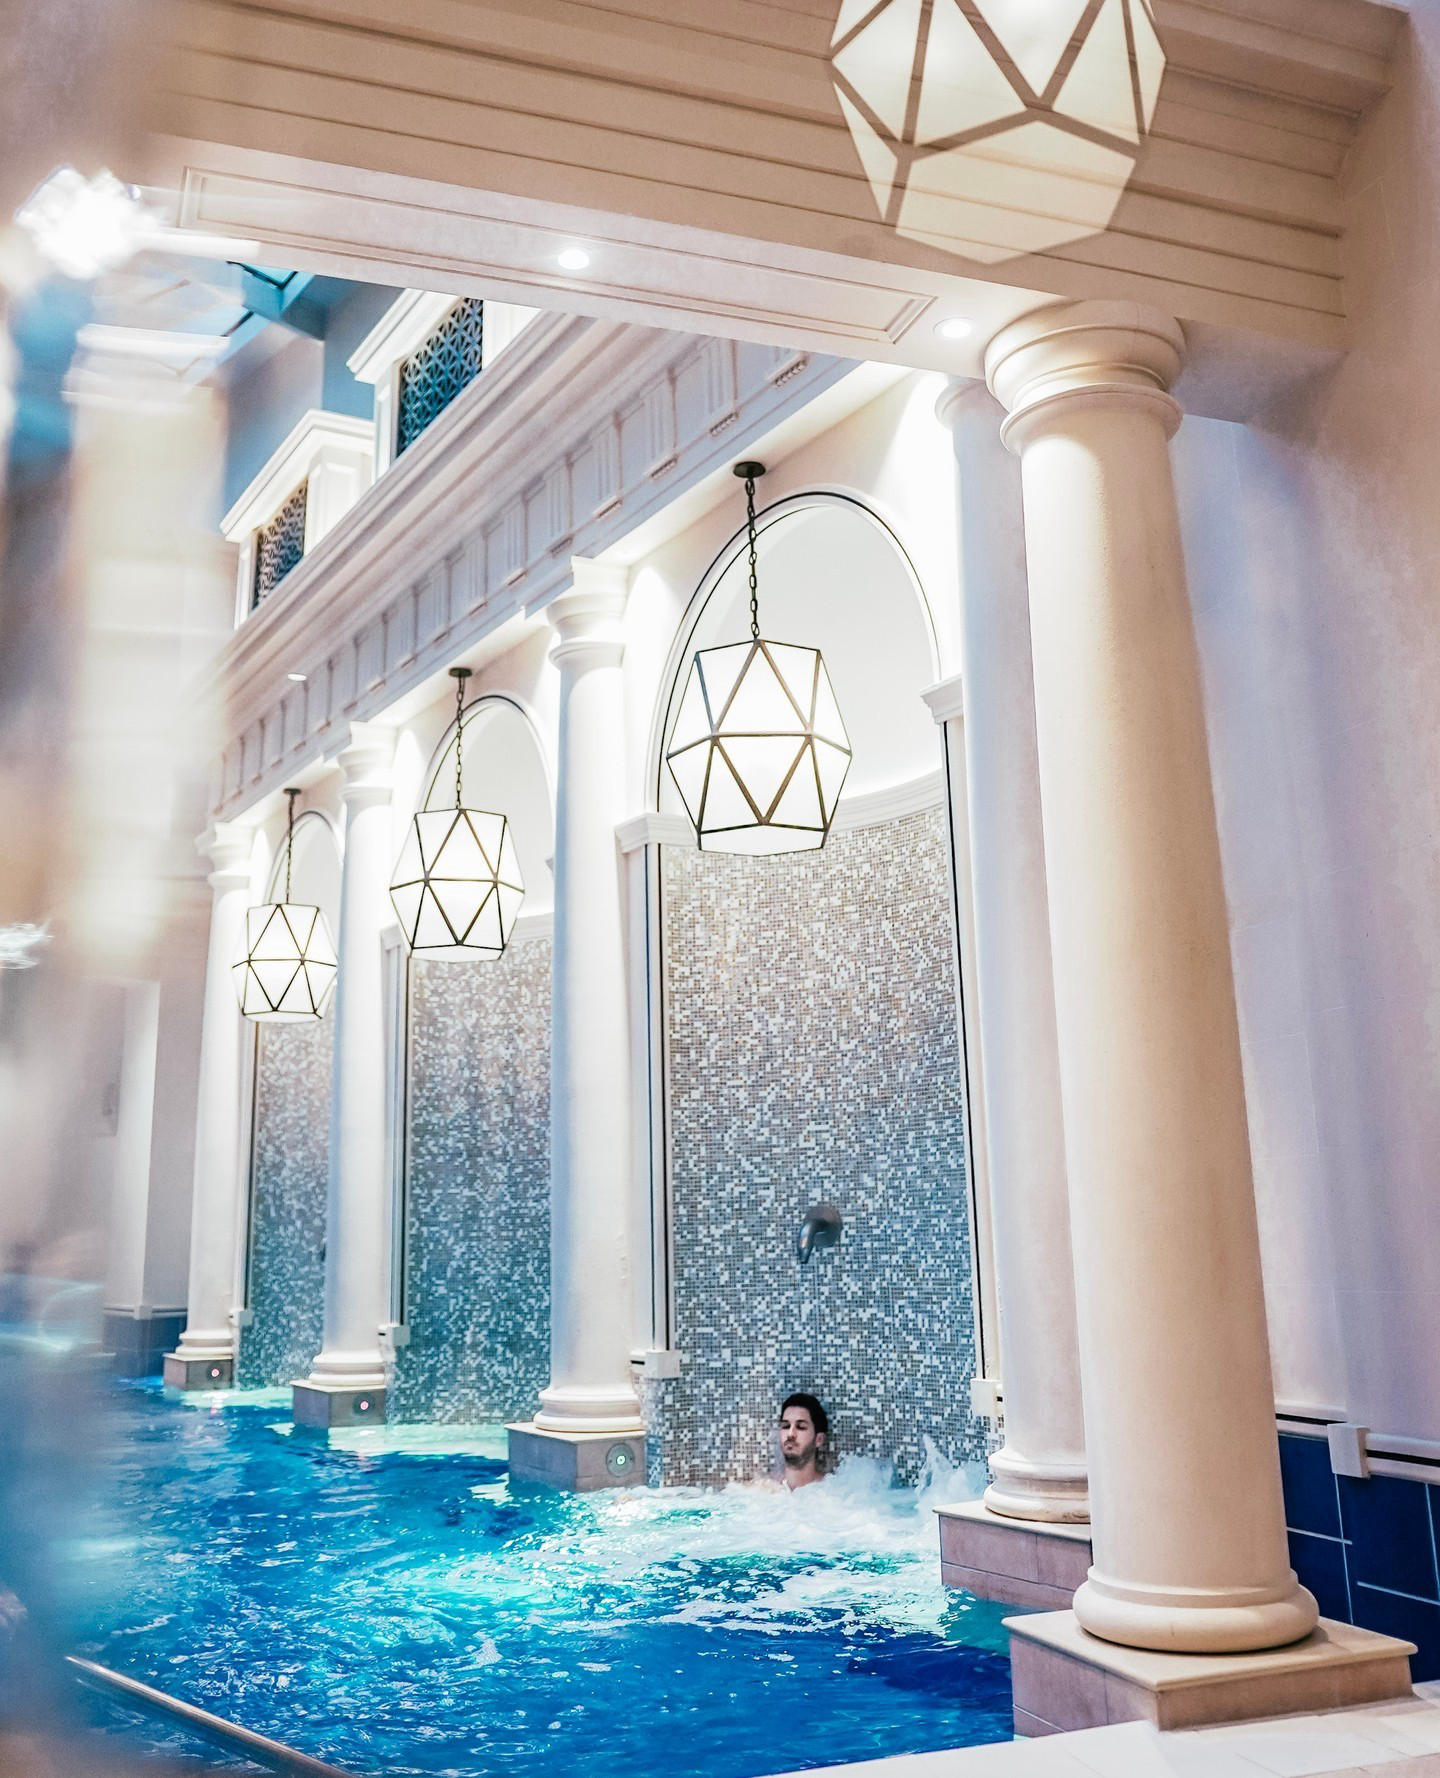 The Gainsborough Bath Spa - As the perfect wrap to the year, wash away your stresses with a dip into